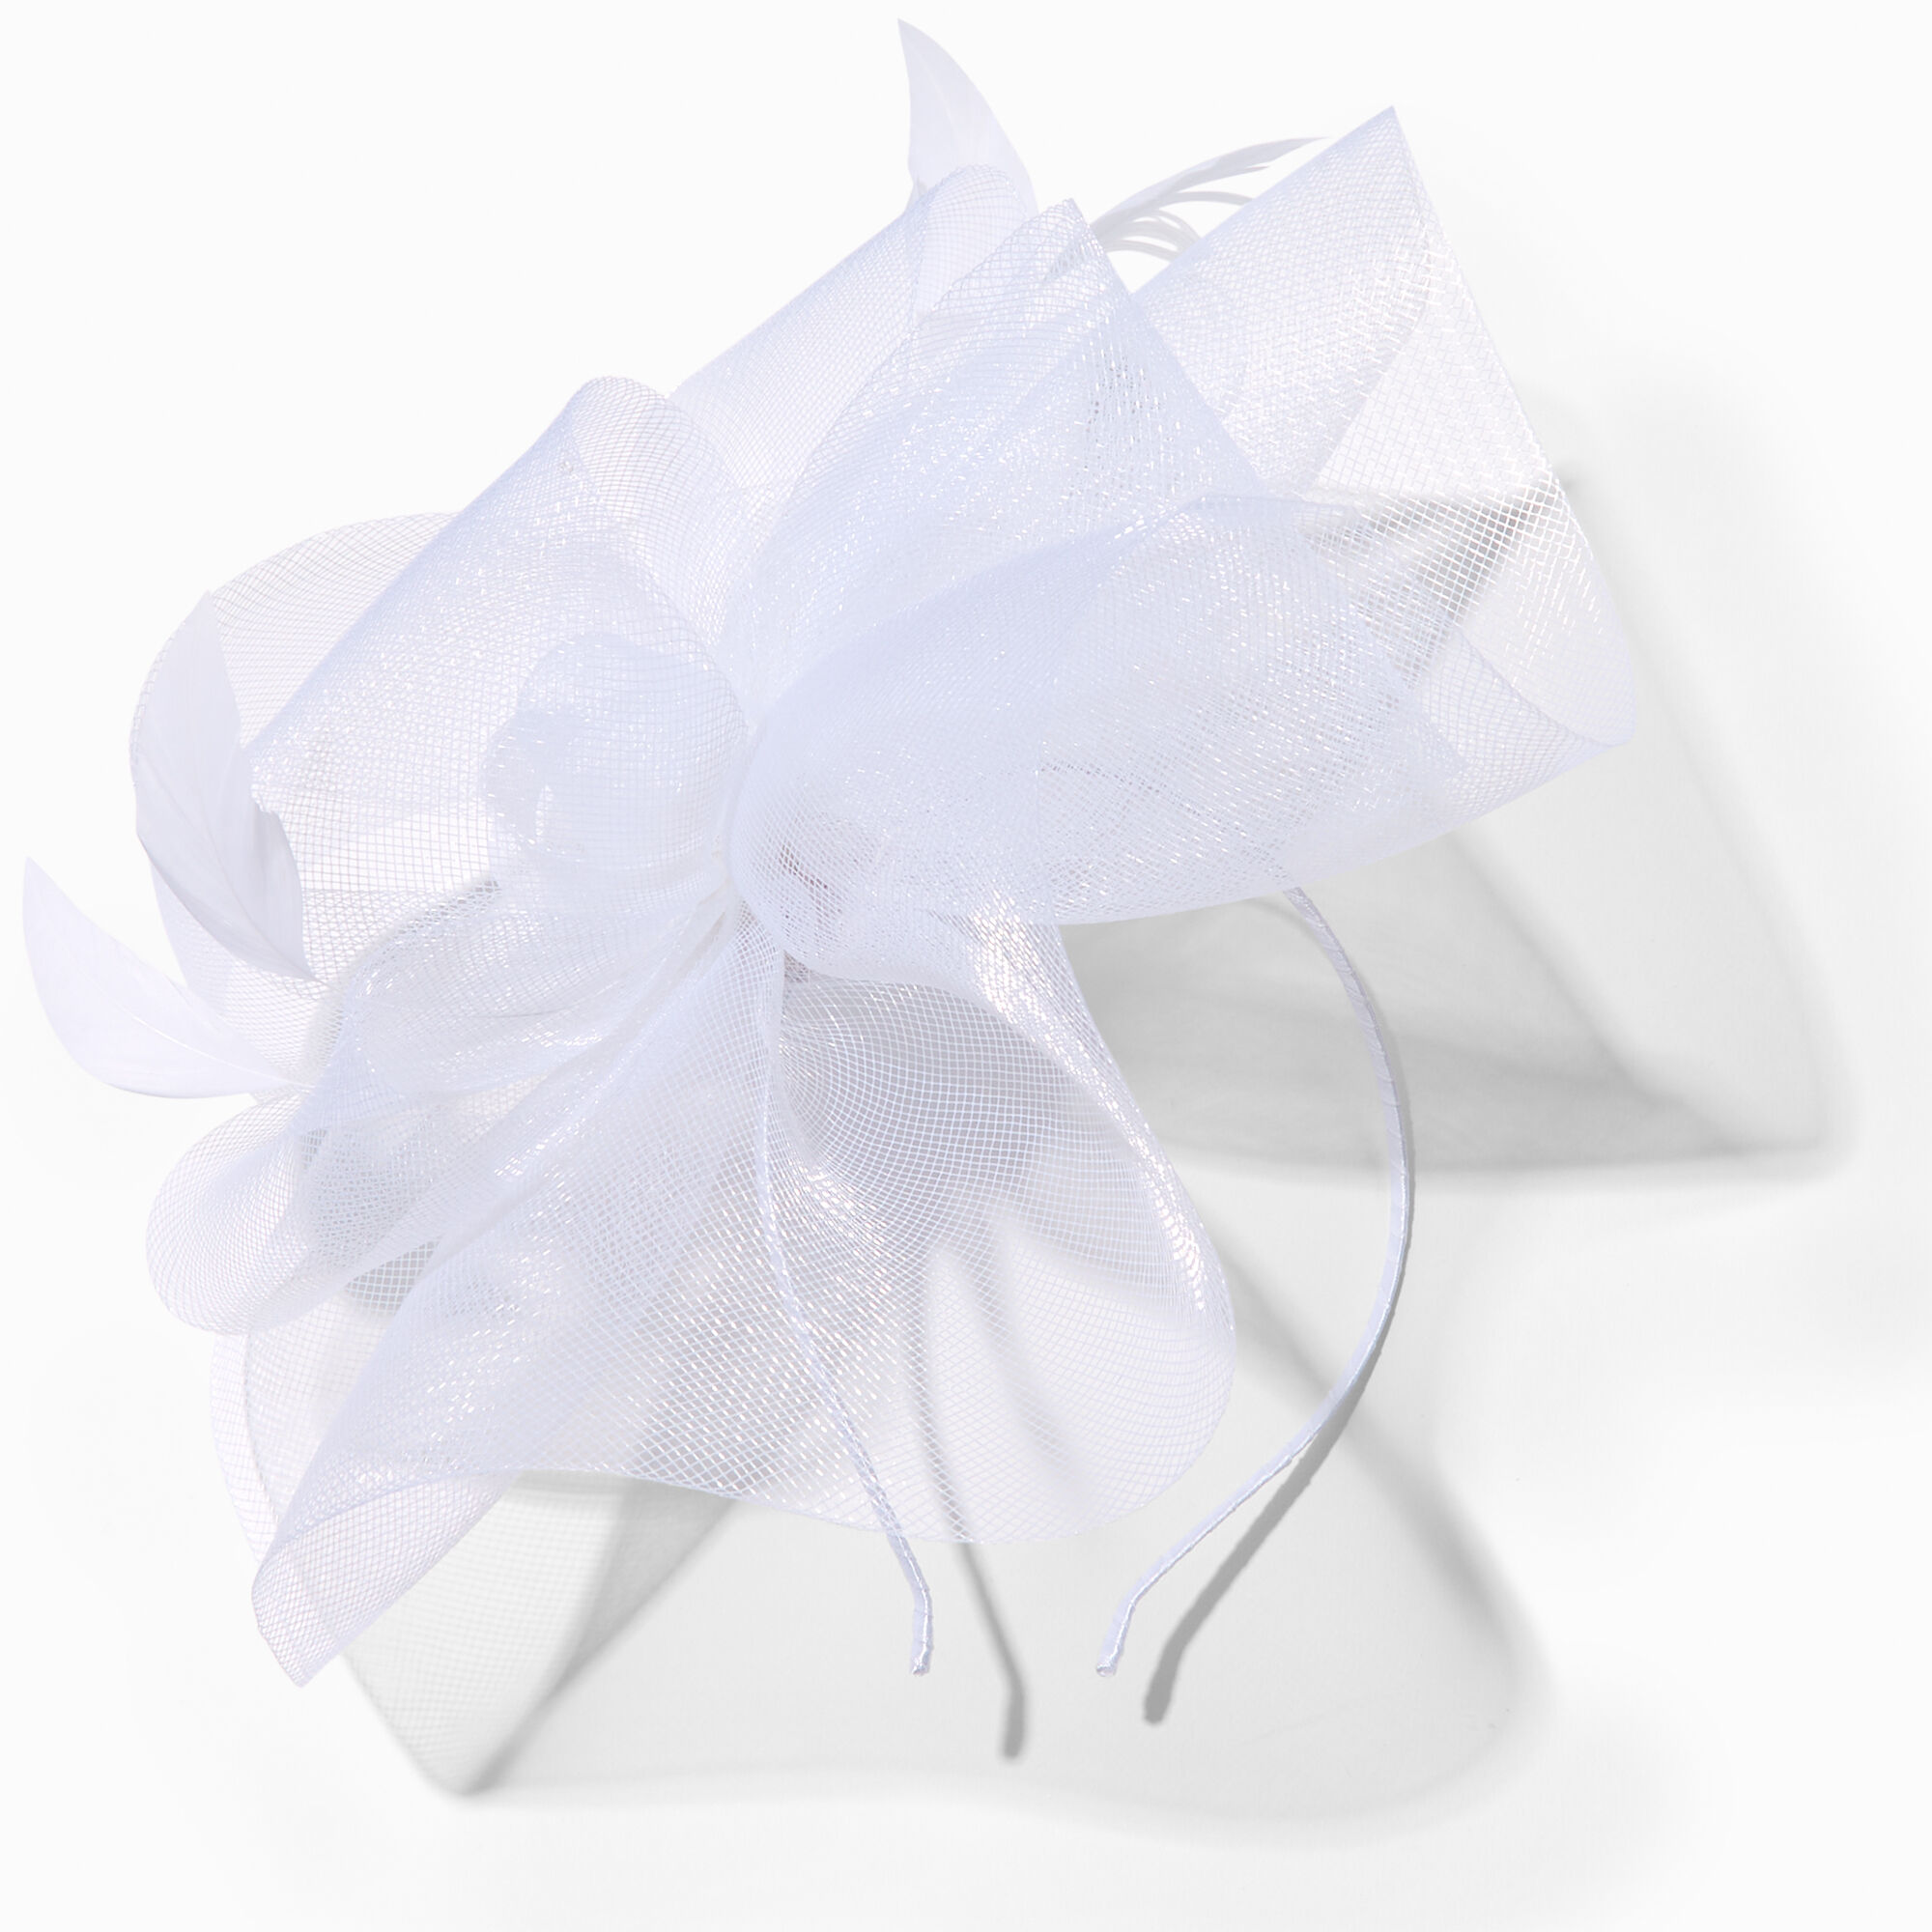 View Claires Feather Swirl Fascinator Headband White information